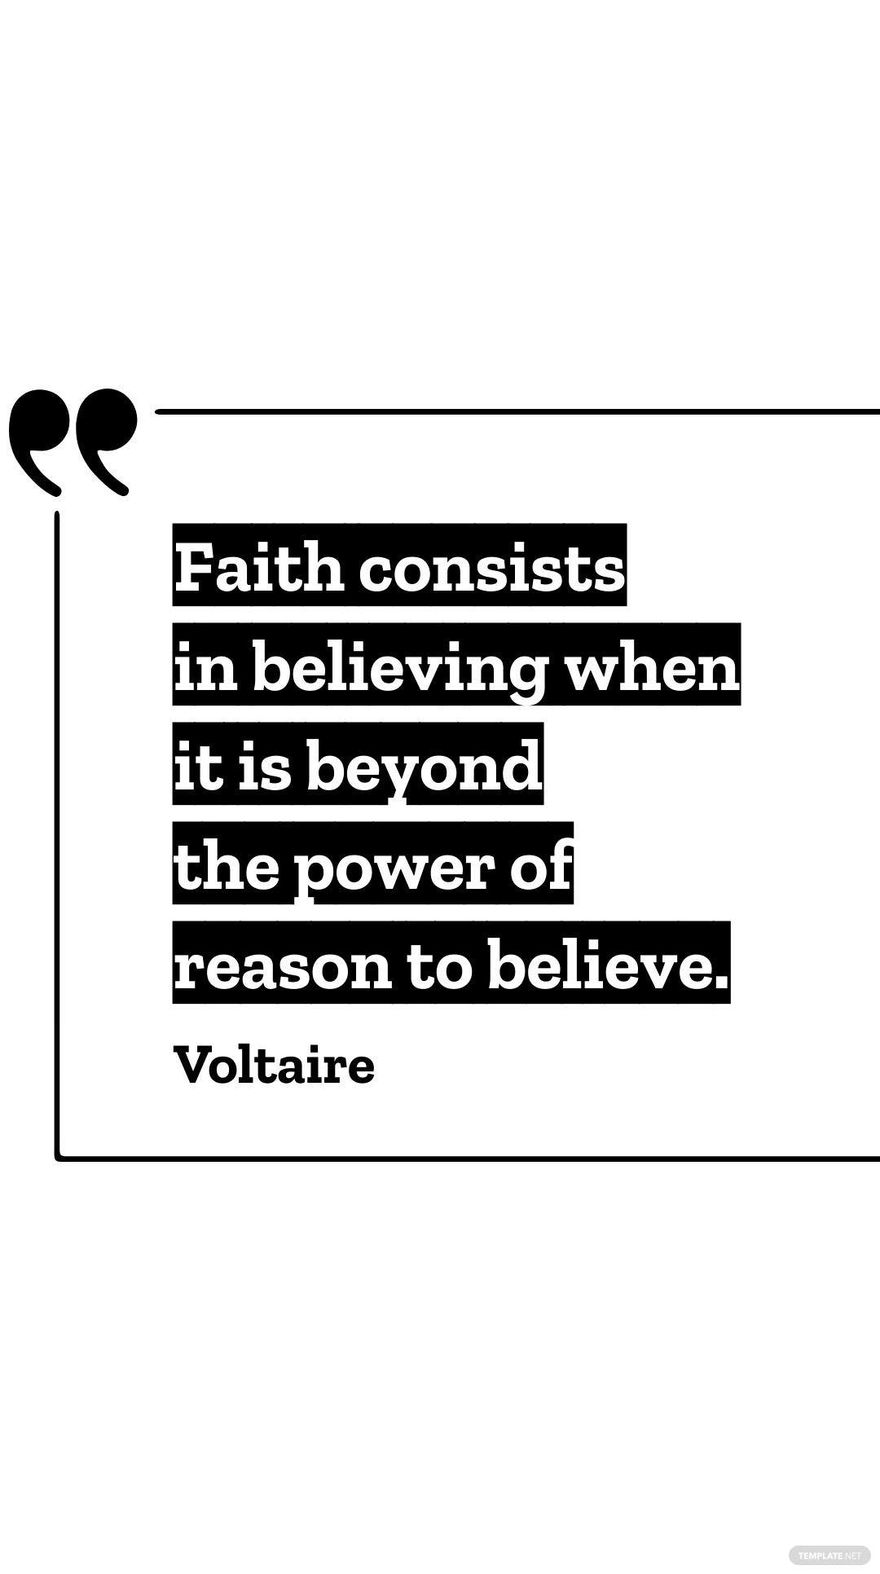 Voltaire - Faith consists in believing when it is beyond the power of reason to believe.